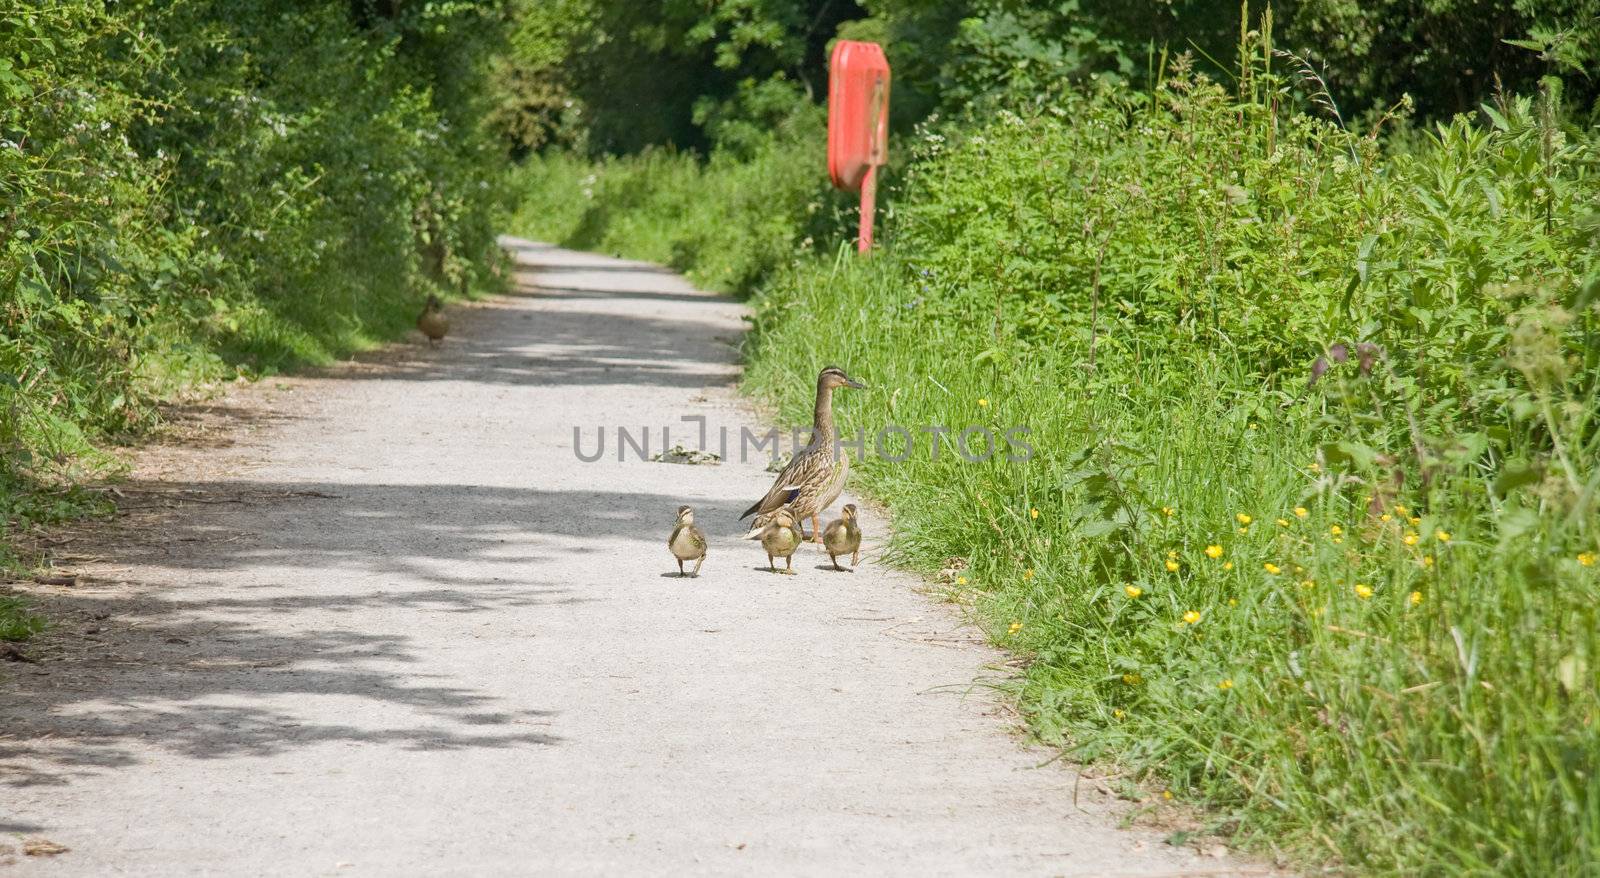 Mother duck walks her three baby ducklings along the cannal bank.